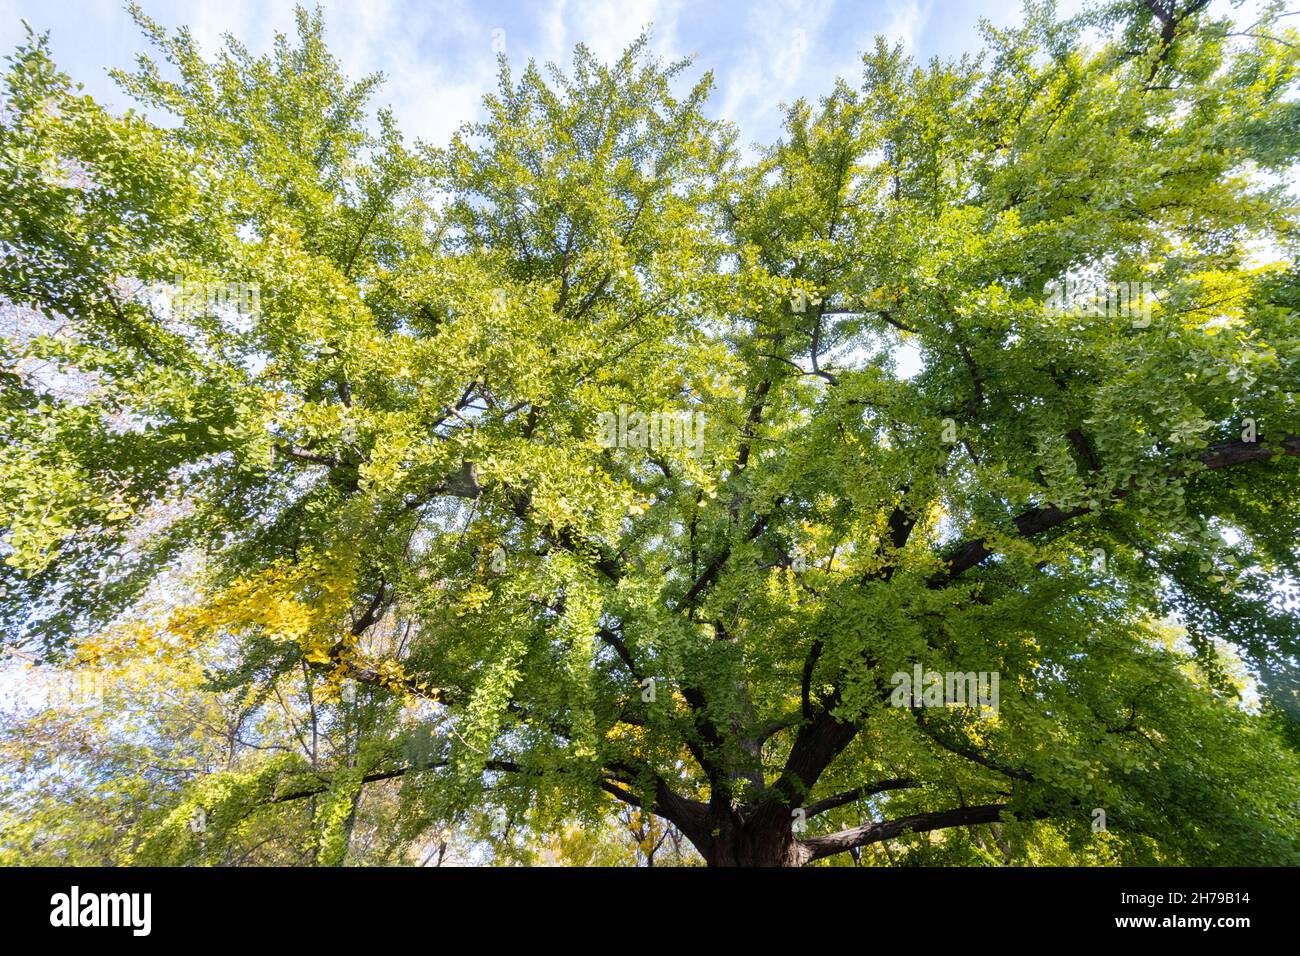 full green foliage canopy of the great Gingko Tree in Isham park, New York, against a blue, cloudy sky, in early fall, autumn Stock Photo